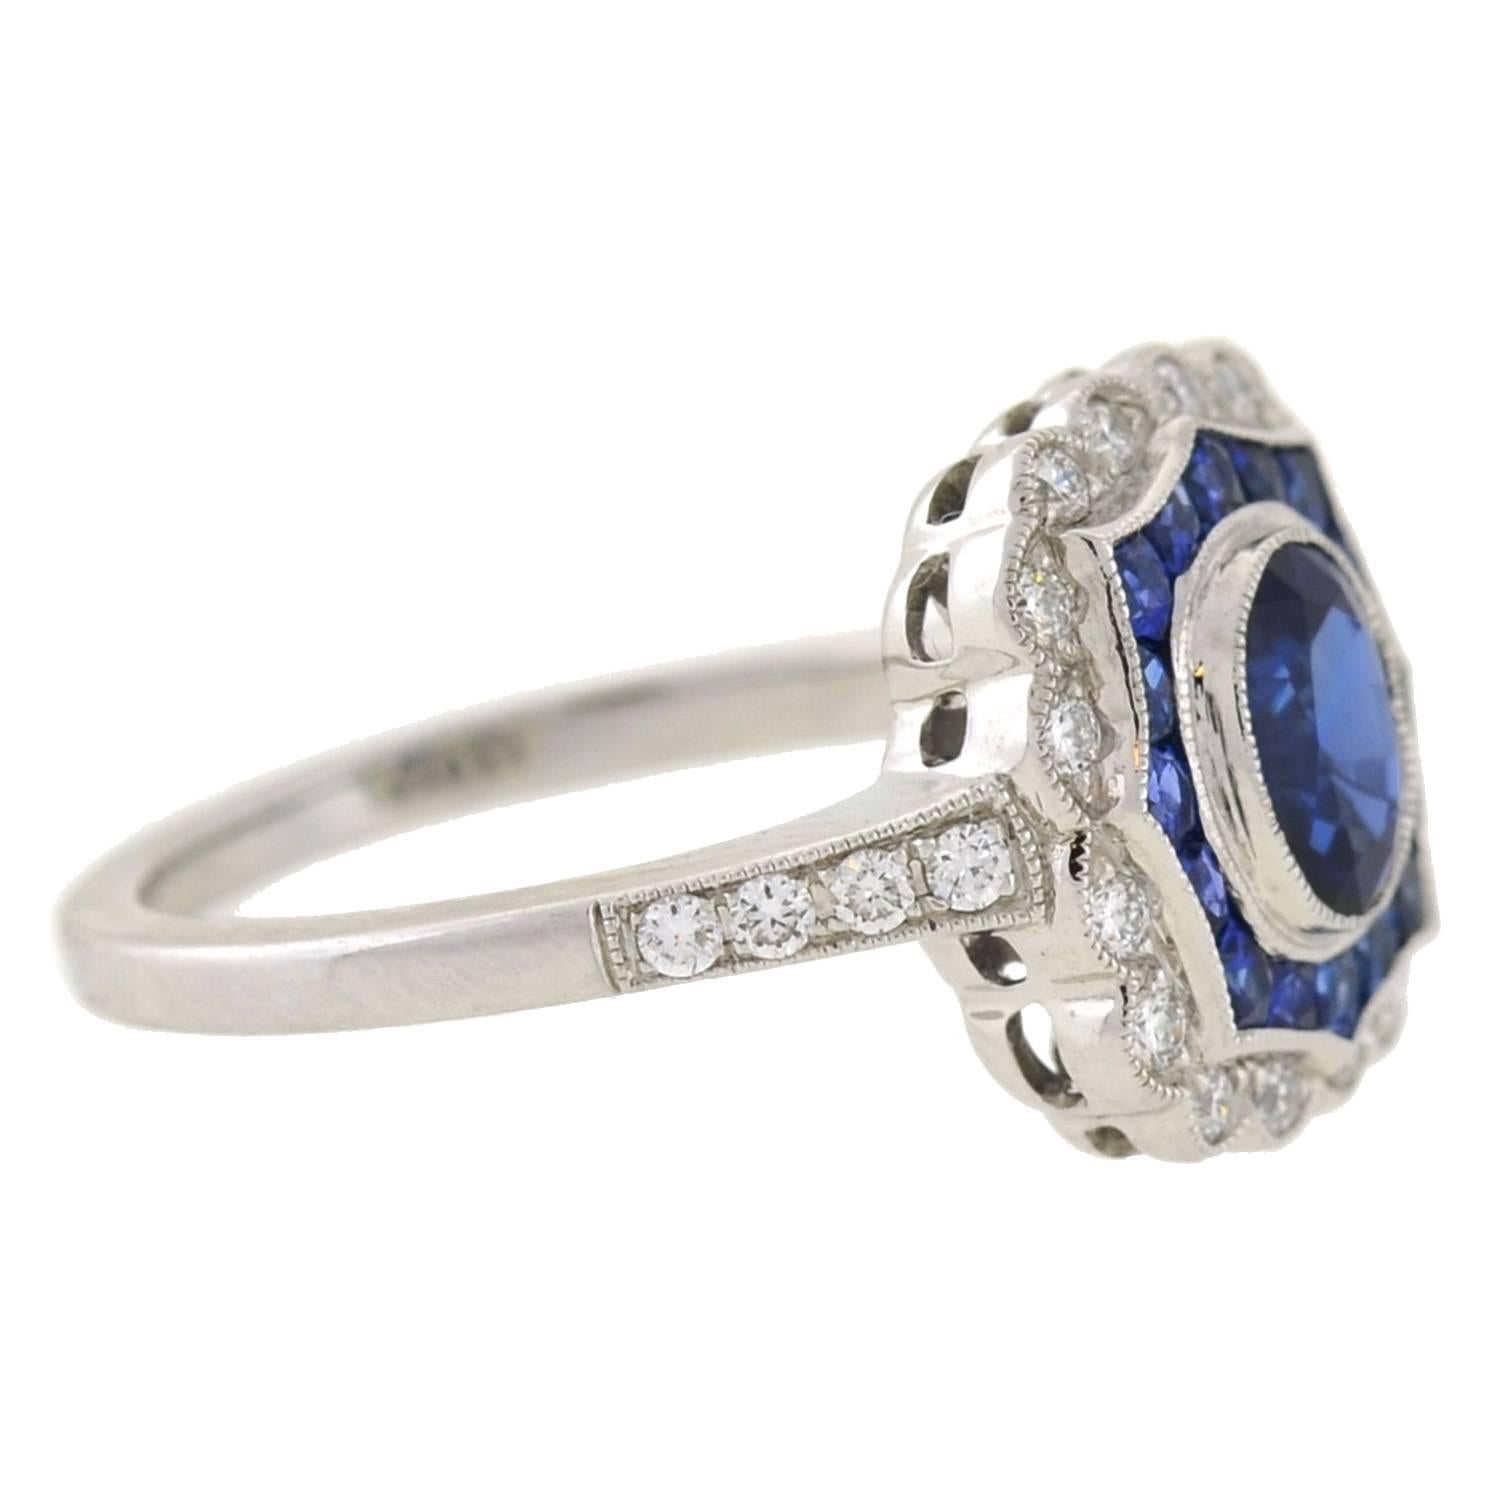 This spectacular sapphire and diamond ring is an estate piece inspired by the Art Deco era! Crafted in 18kt white gold, the ring frames a deep blue sapphire stone at the center of a decorative mounting. The oval cut sapphire weighs approximately